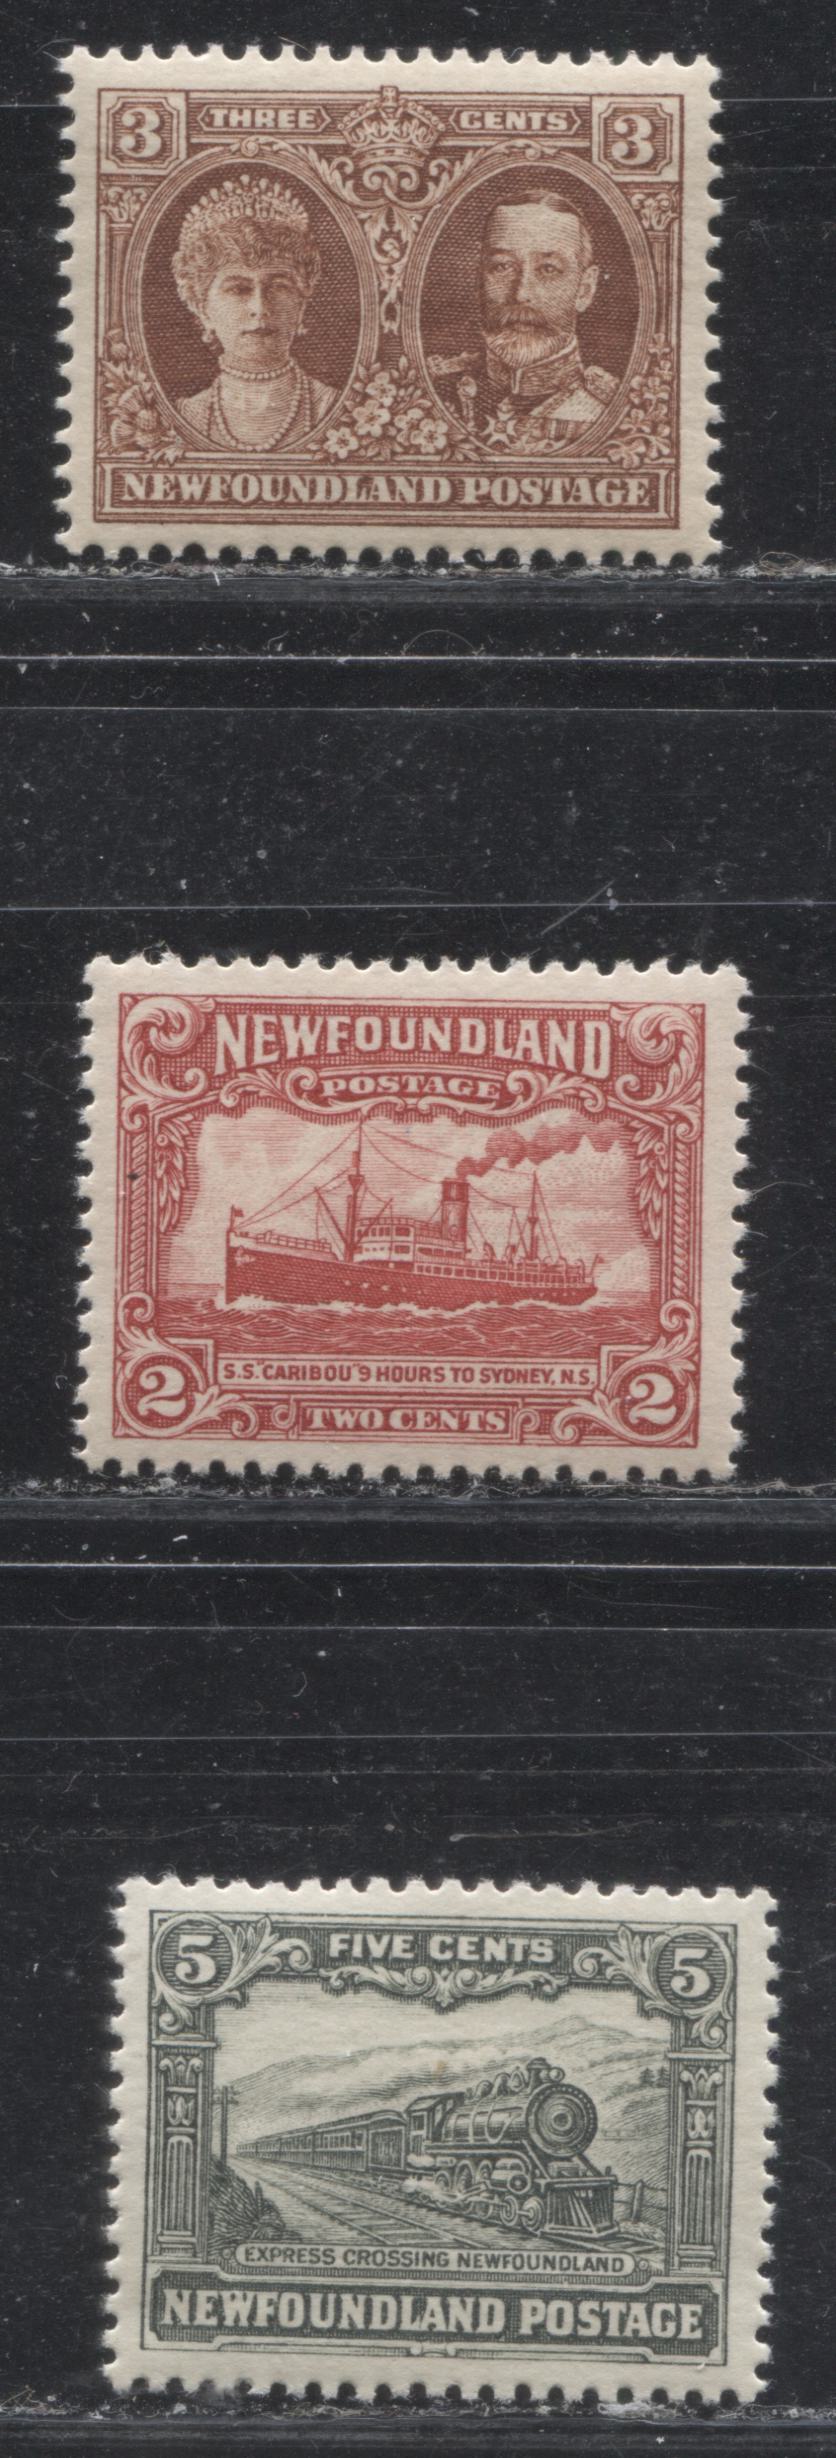 Lot 81 Newfoundland # 164-165, 167 3c - 5c Red Brown - Slate Green King George V & Queen Mary - Express Crossing, 1929-1931 Re-Engraved Publicity Issue, Three VFNH Examples, Various Comb Perfs